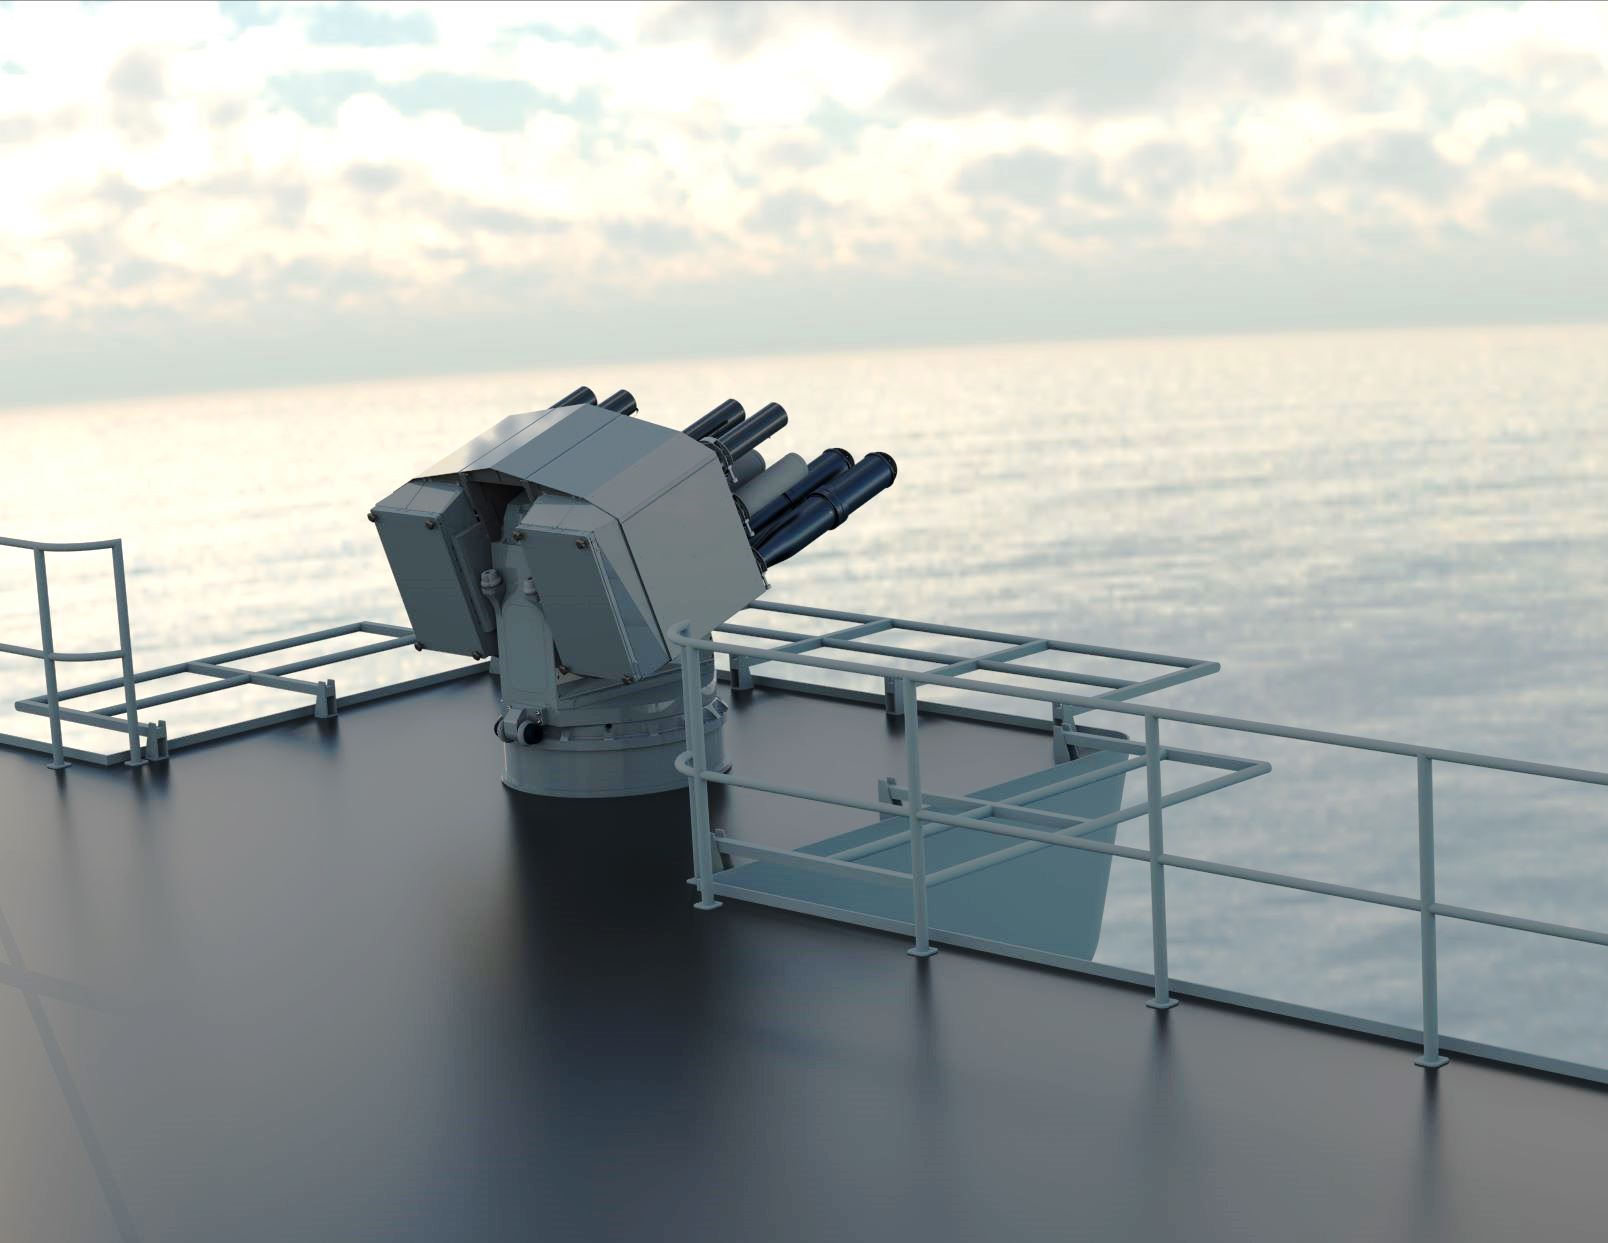 SEA to fit Royal Navy countermeasure launcher system